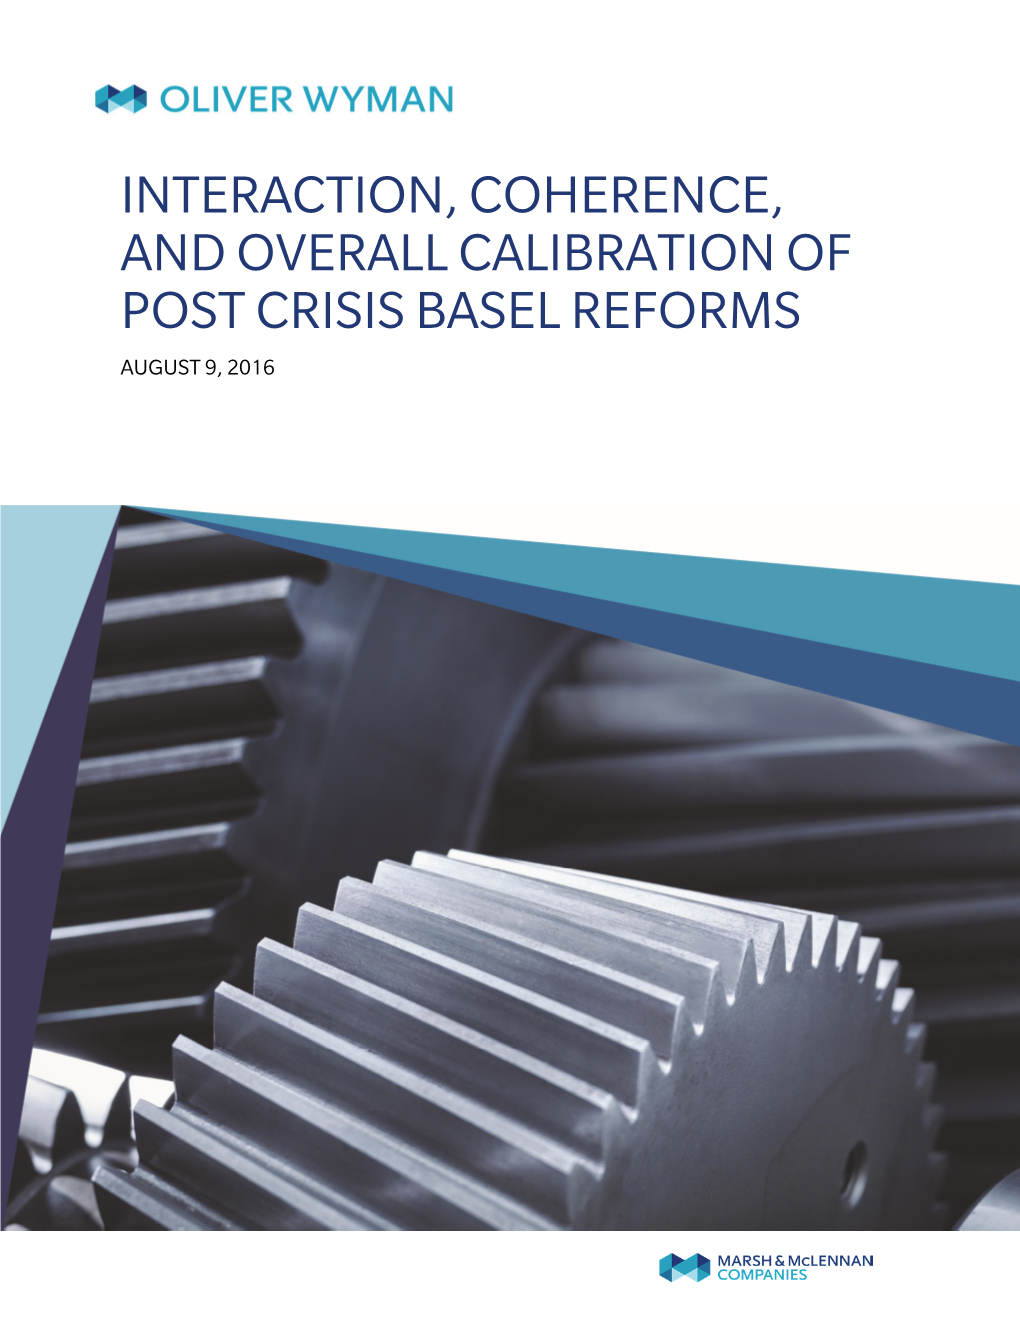 Interaction, Coherence and Overall Calibration of Post Crisis Basel Reforms